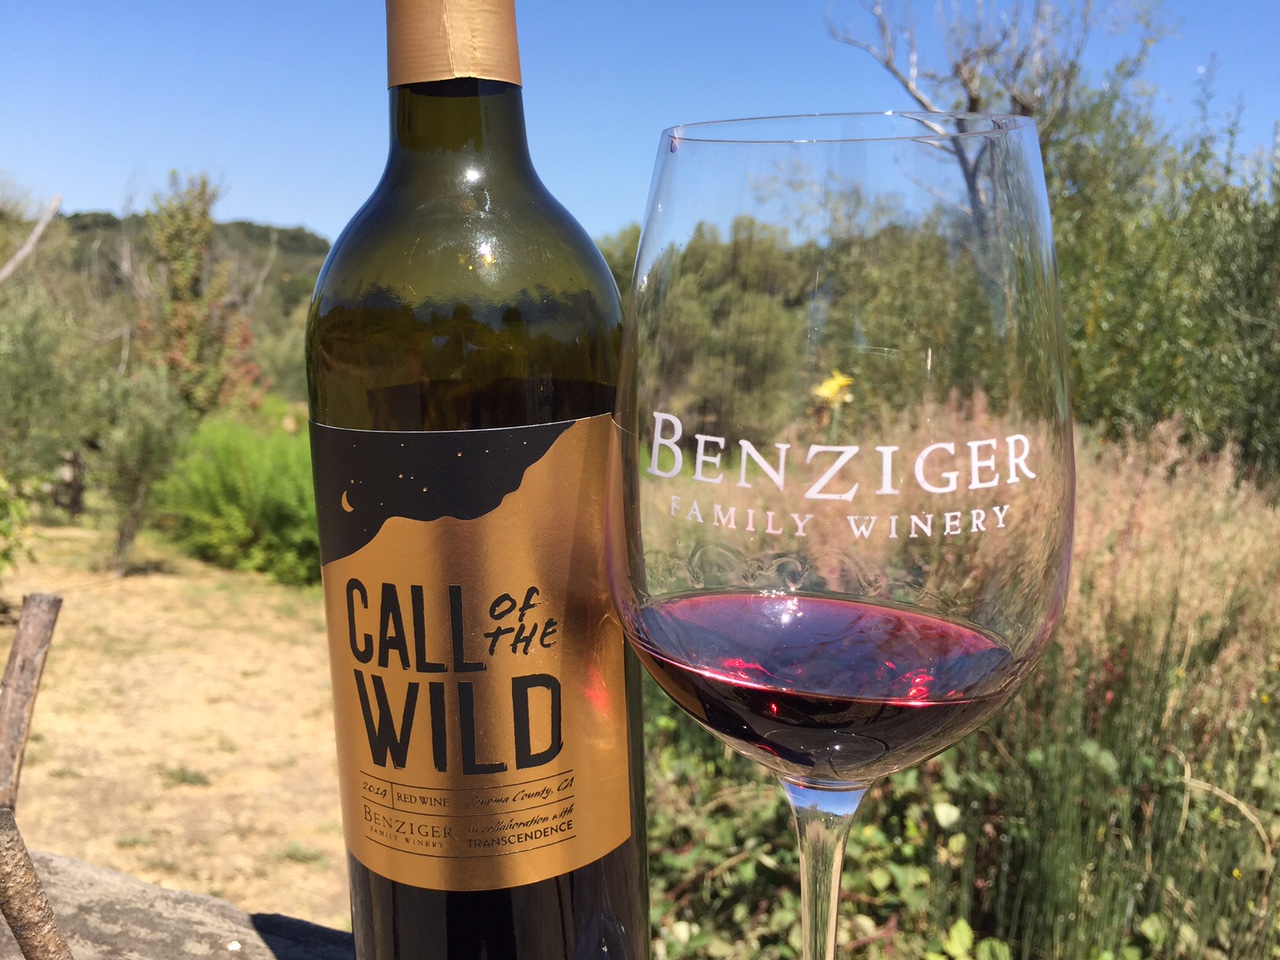 2014 Red Wine Call of The Wild from Benziger Family Winery (credit: Foodie Chap/Liam Mayclem)